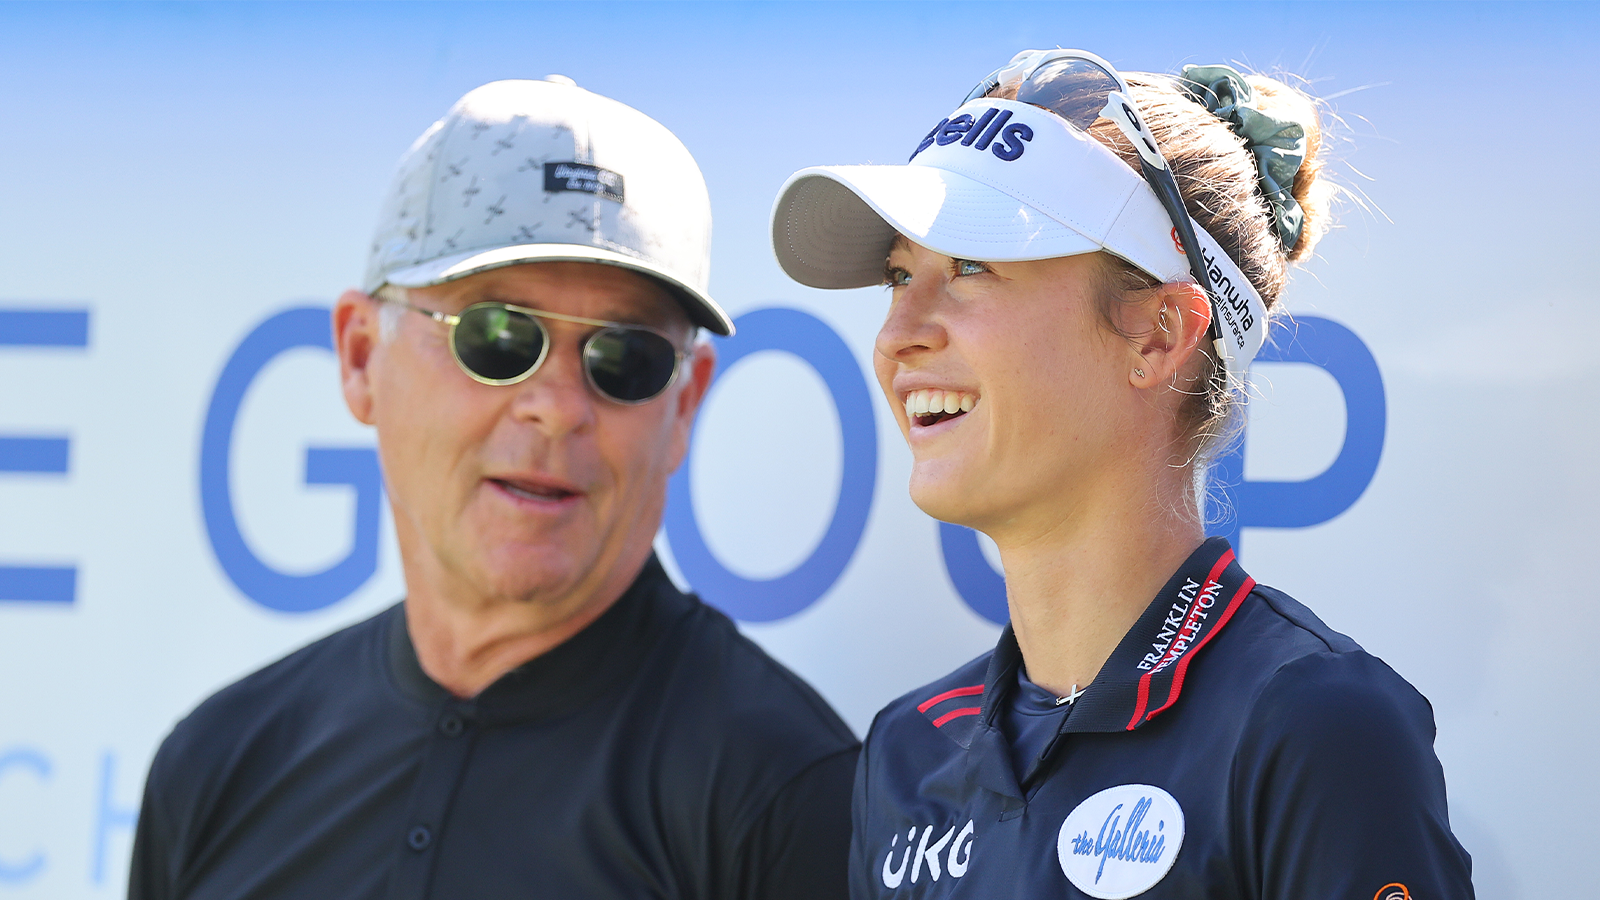 Swing instructor Jamie Mulligan, PGA, talks with Nelly Korda of the United States prior to the CME Group Tour Championship at Tiburon Golf Club on November 16, 2022 in Naples, Florida. (Photo by Michael Reaves/Getty Images)